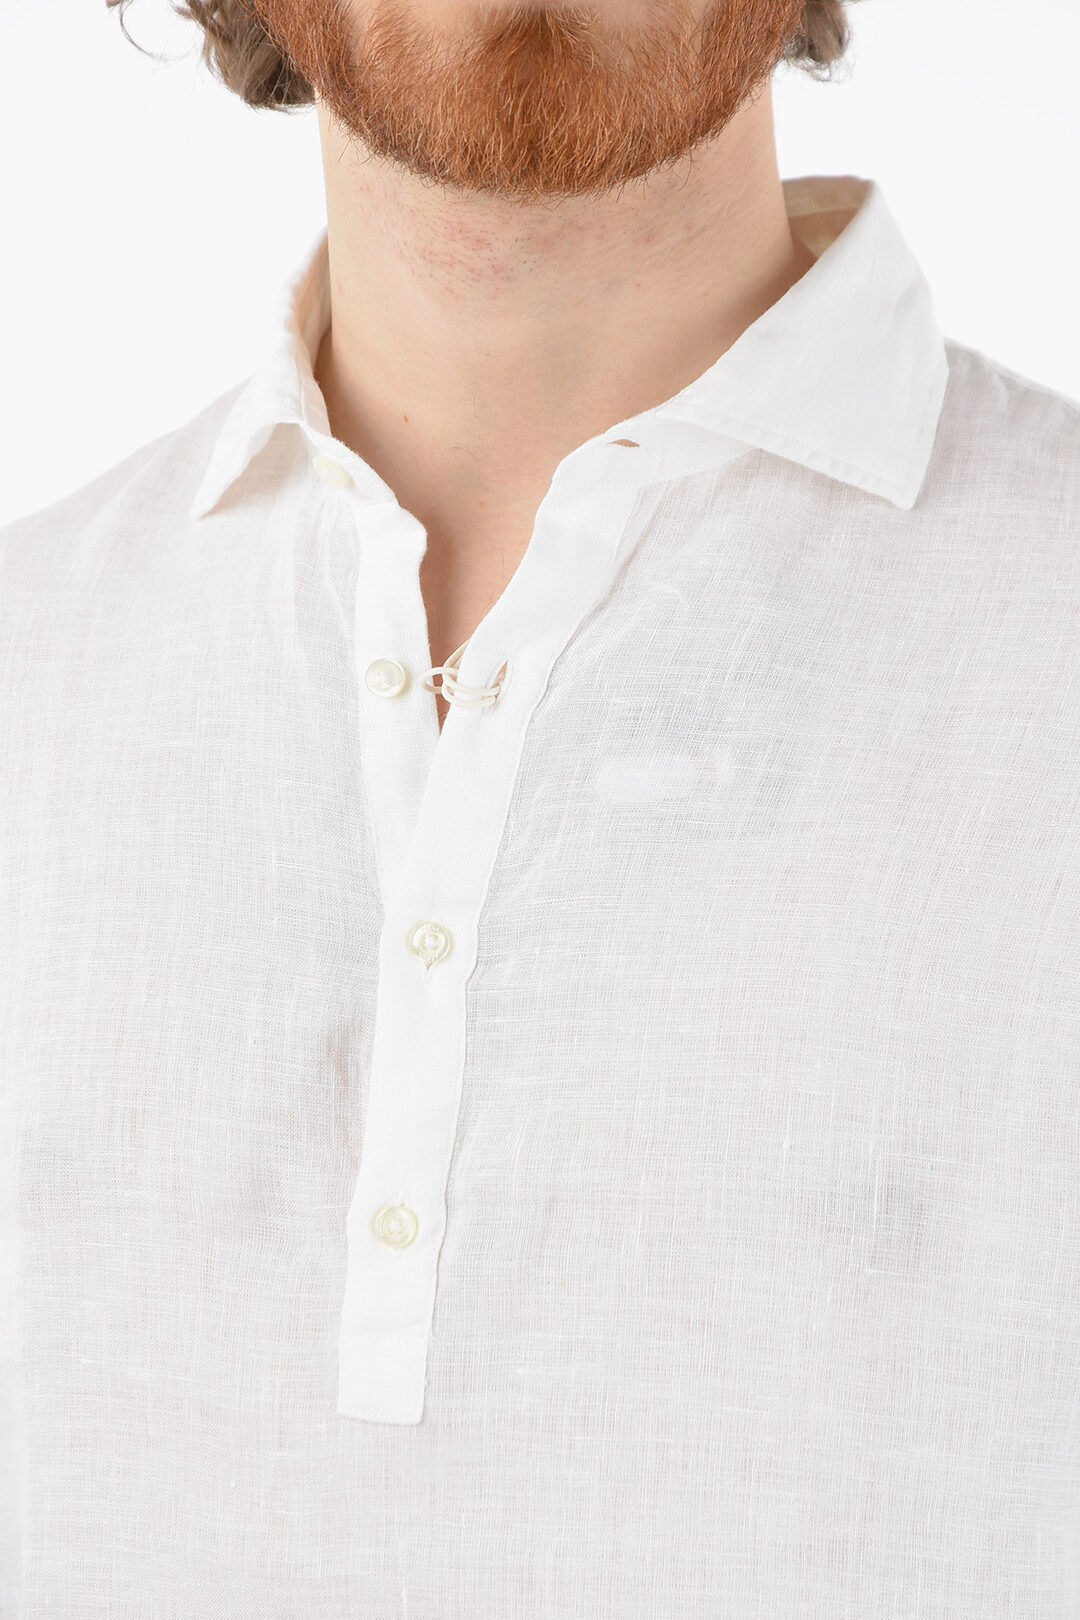 Altea Solid Color Flax TYLER Shirt men - Glamood Outlet